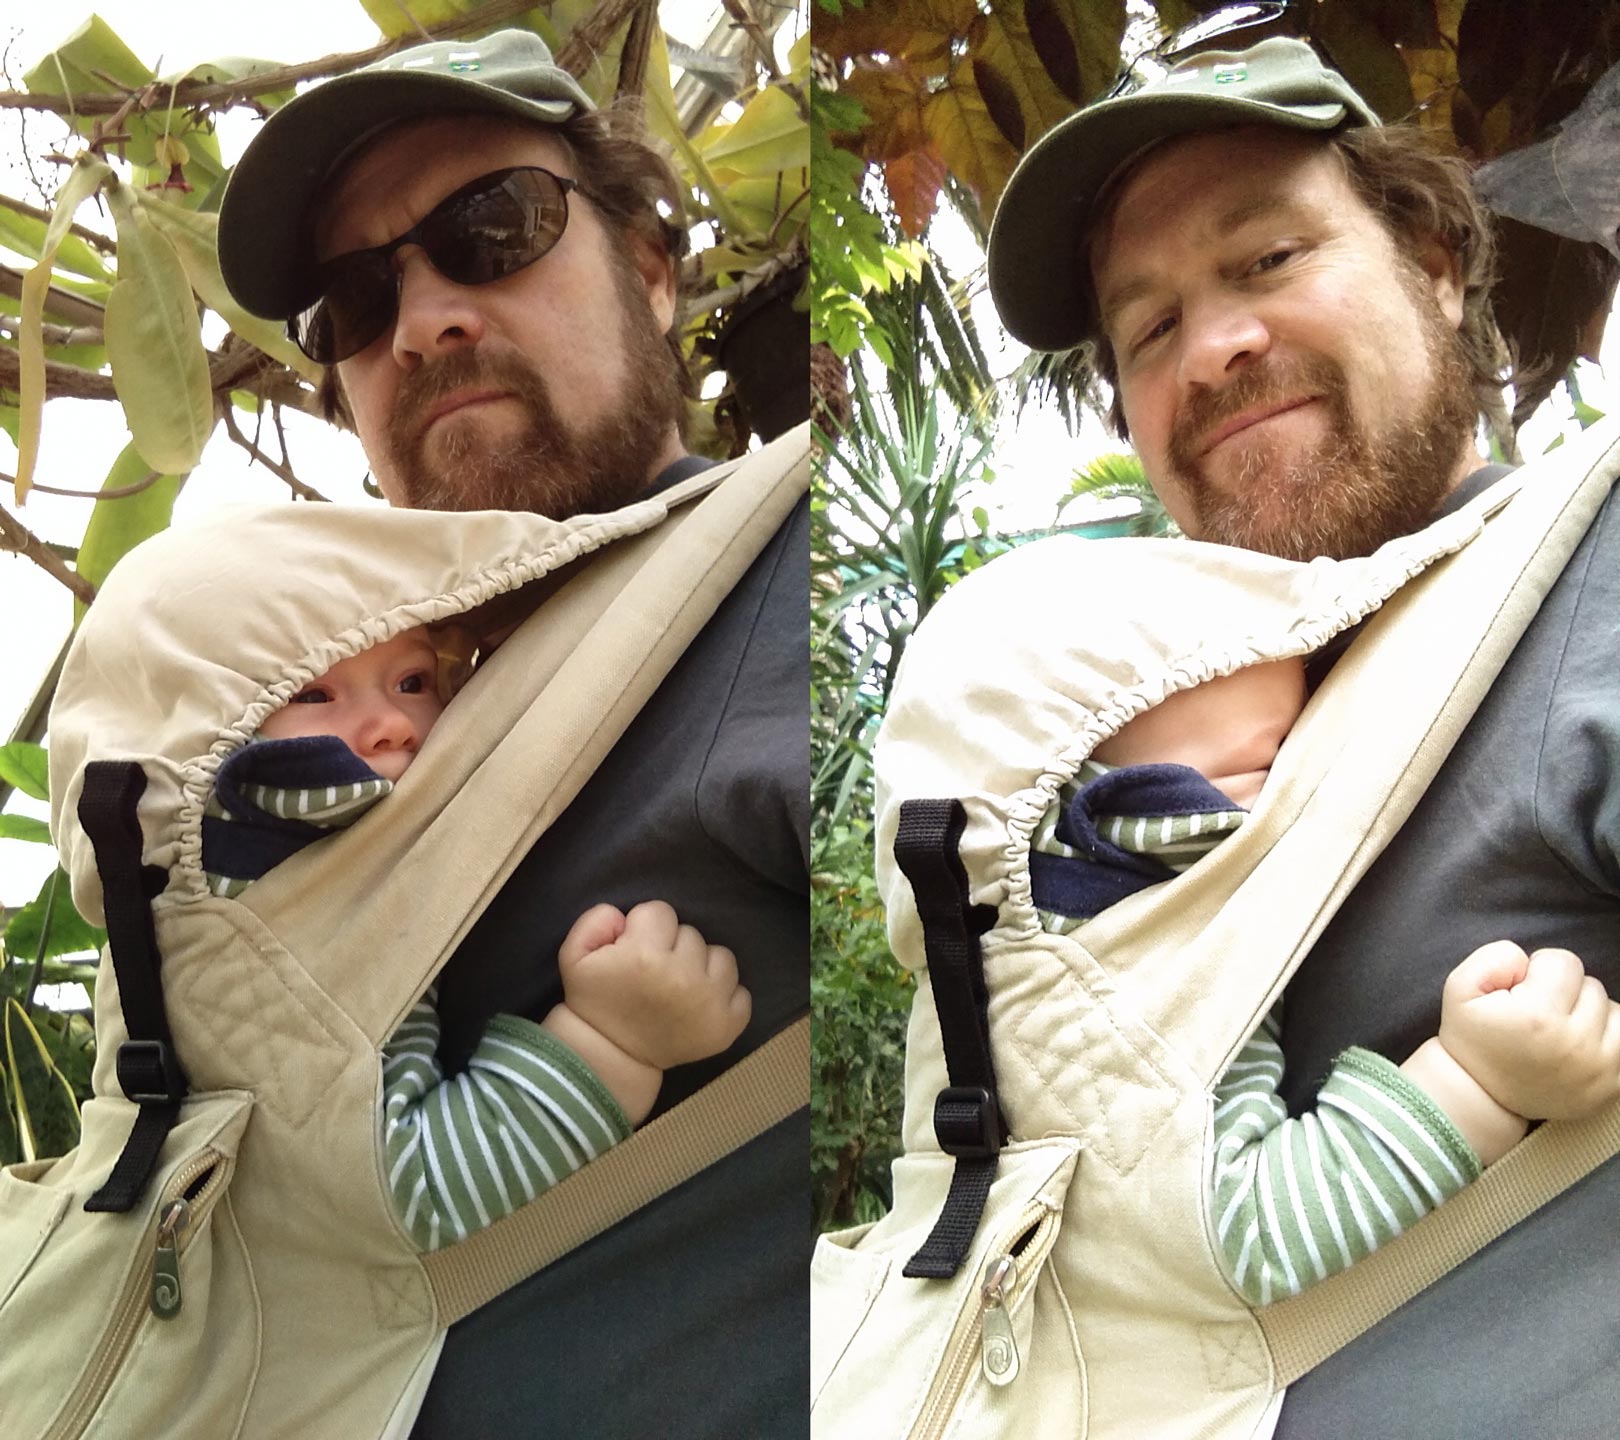 Back in the dark ages, parents on a walk with a baby lashed on didn't always know if the kid was asleep. But now, a phone's selfie-cam can answer that question. Left: no. Right: yes.